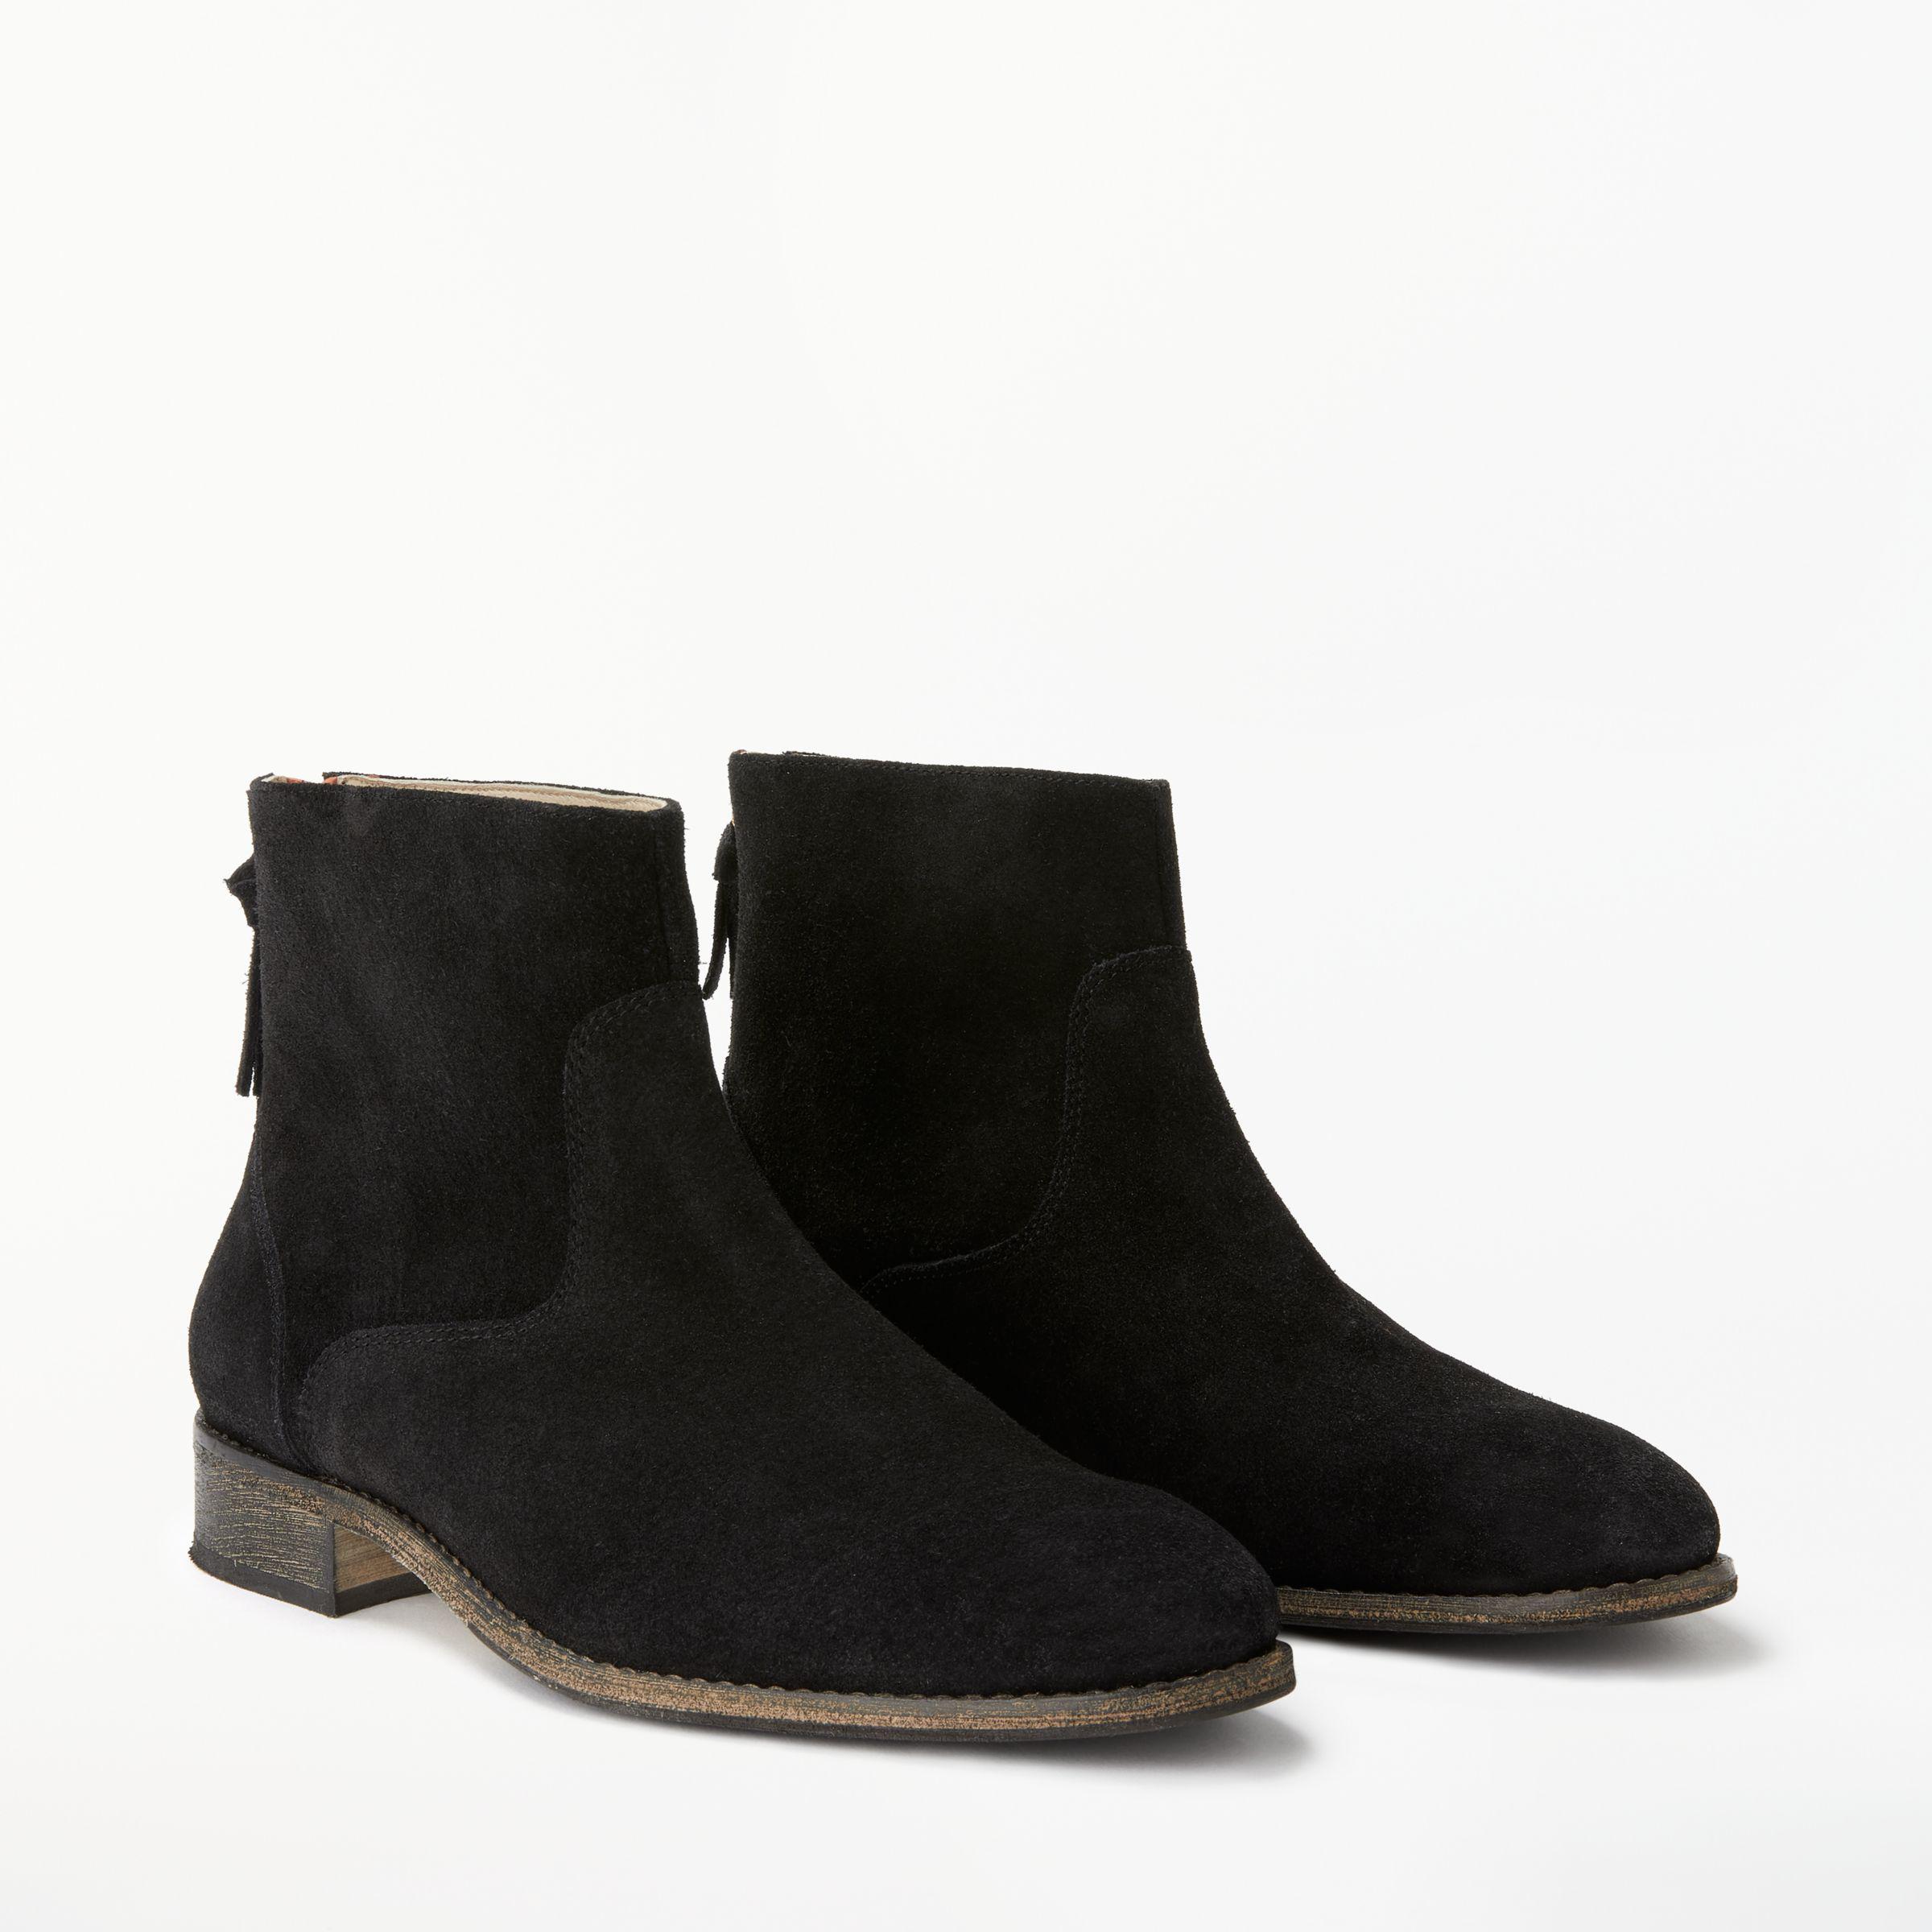 Boden Suede Kingham Ankle Boots in 